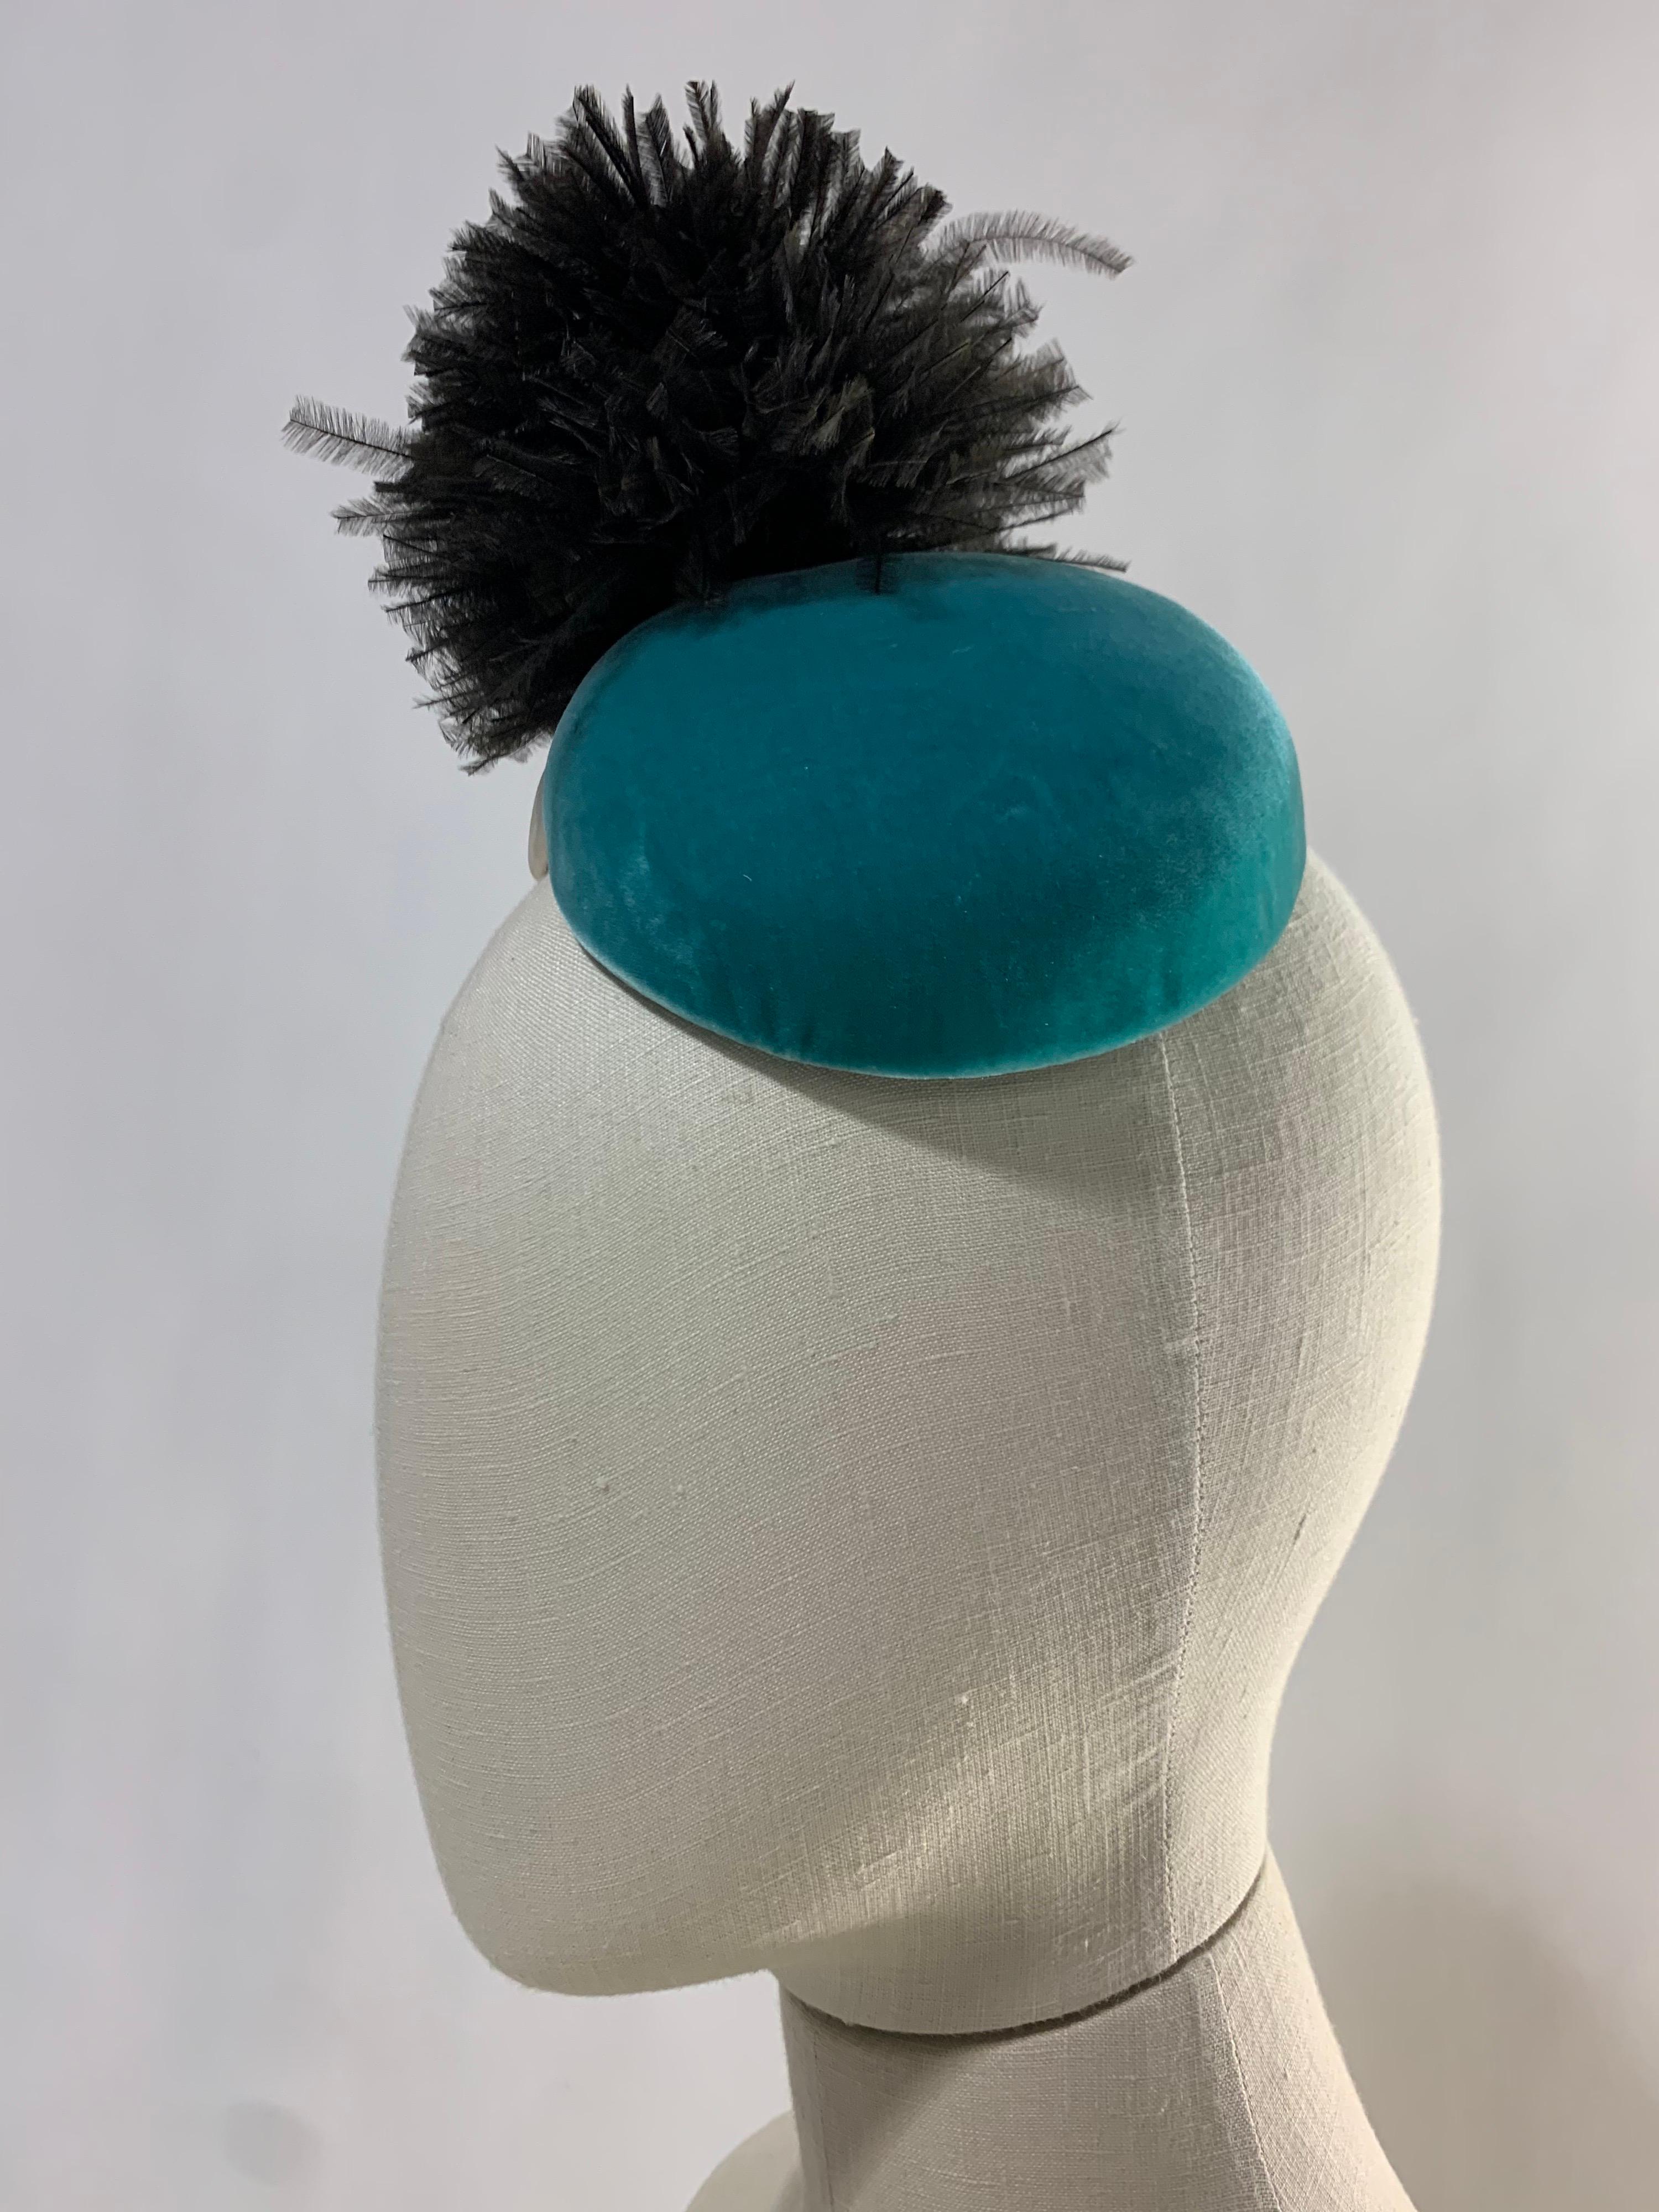 1950s Bonwit Teller Avant Garde Toy Hat in Turquoise & Ivory w/ Black Pouf  In Excellent Condition For Sale In Gresham, OR